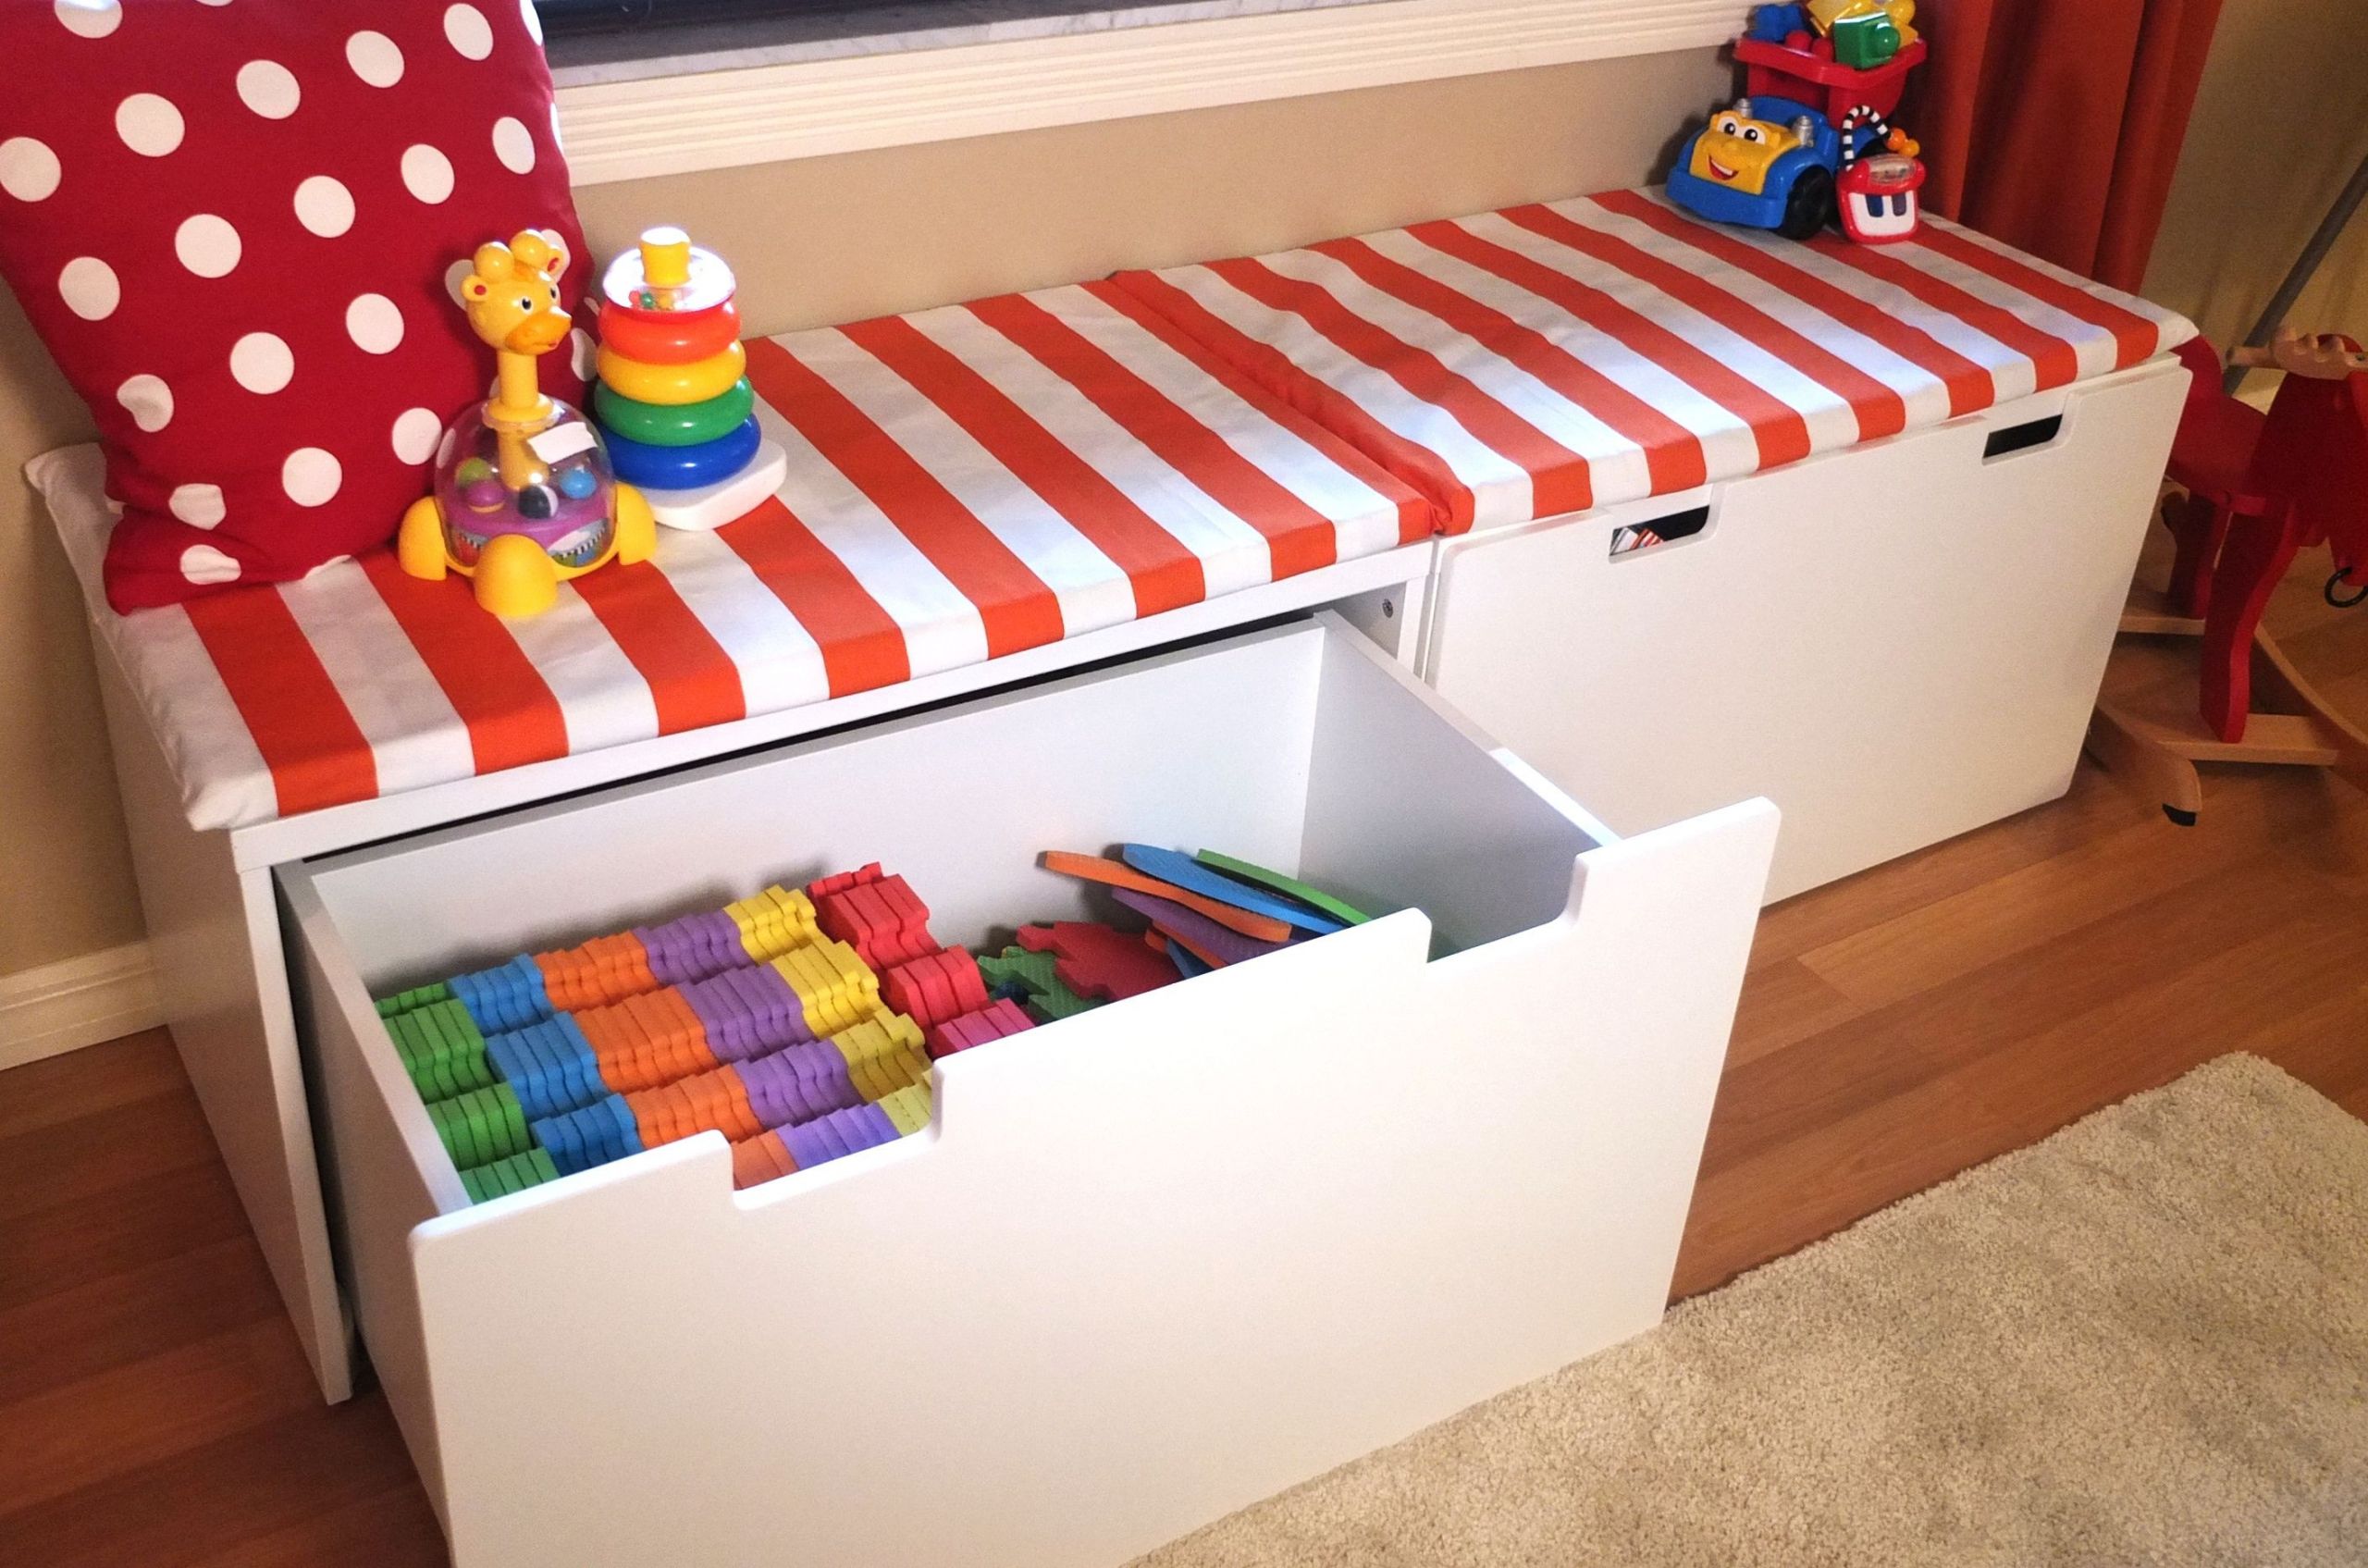 Toy Bench Storage
 The STUVA storage bench provides a fortable window seat